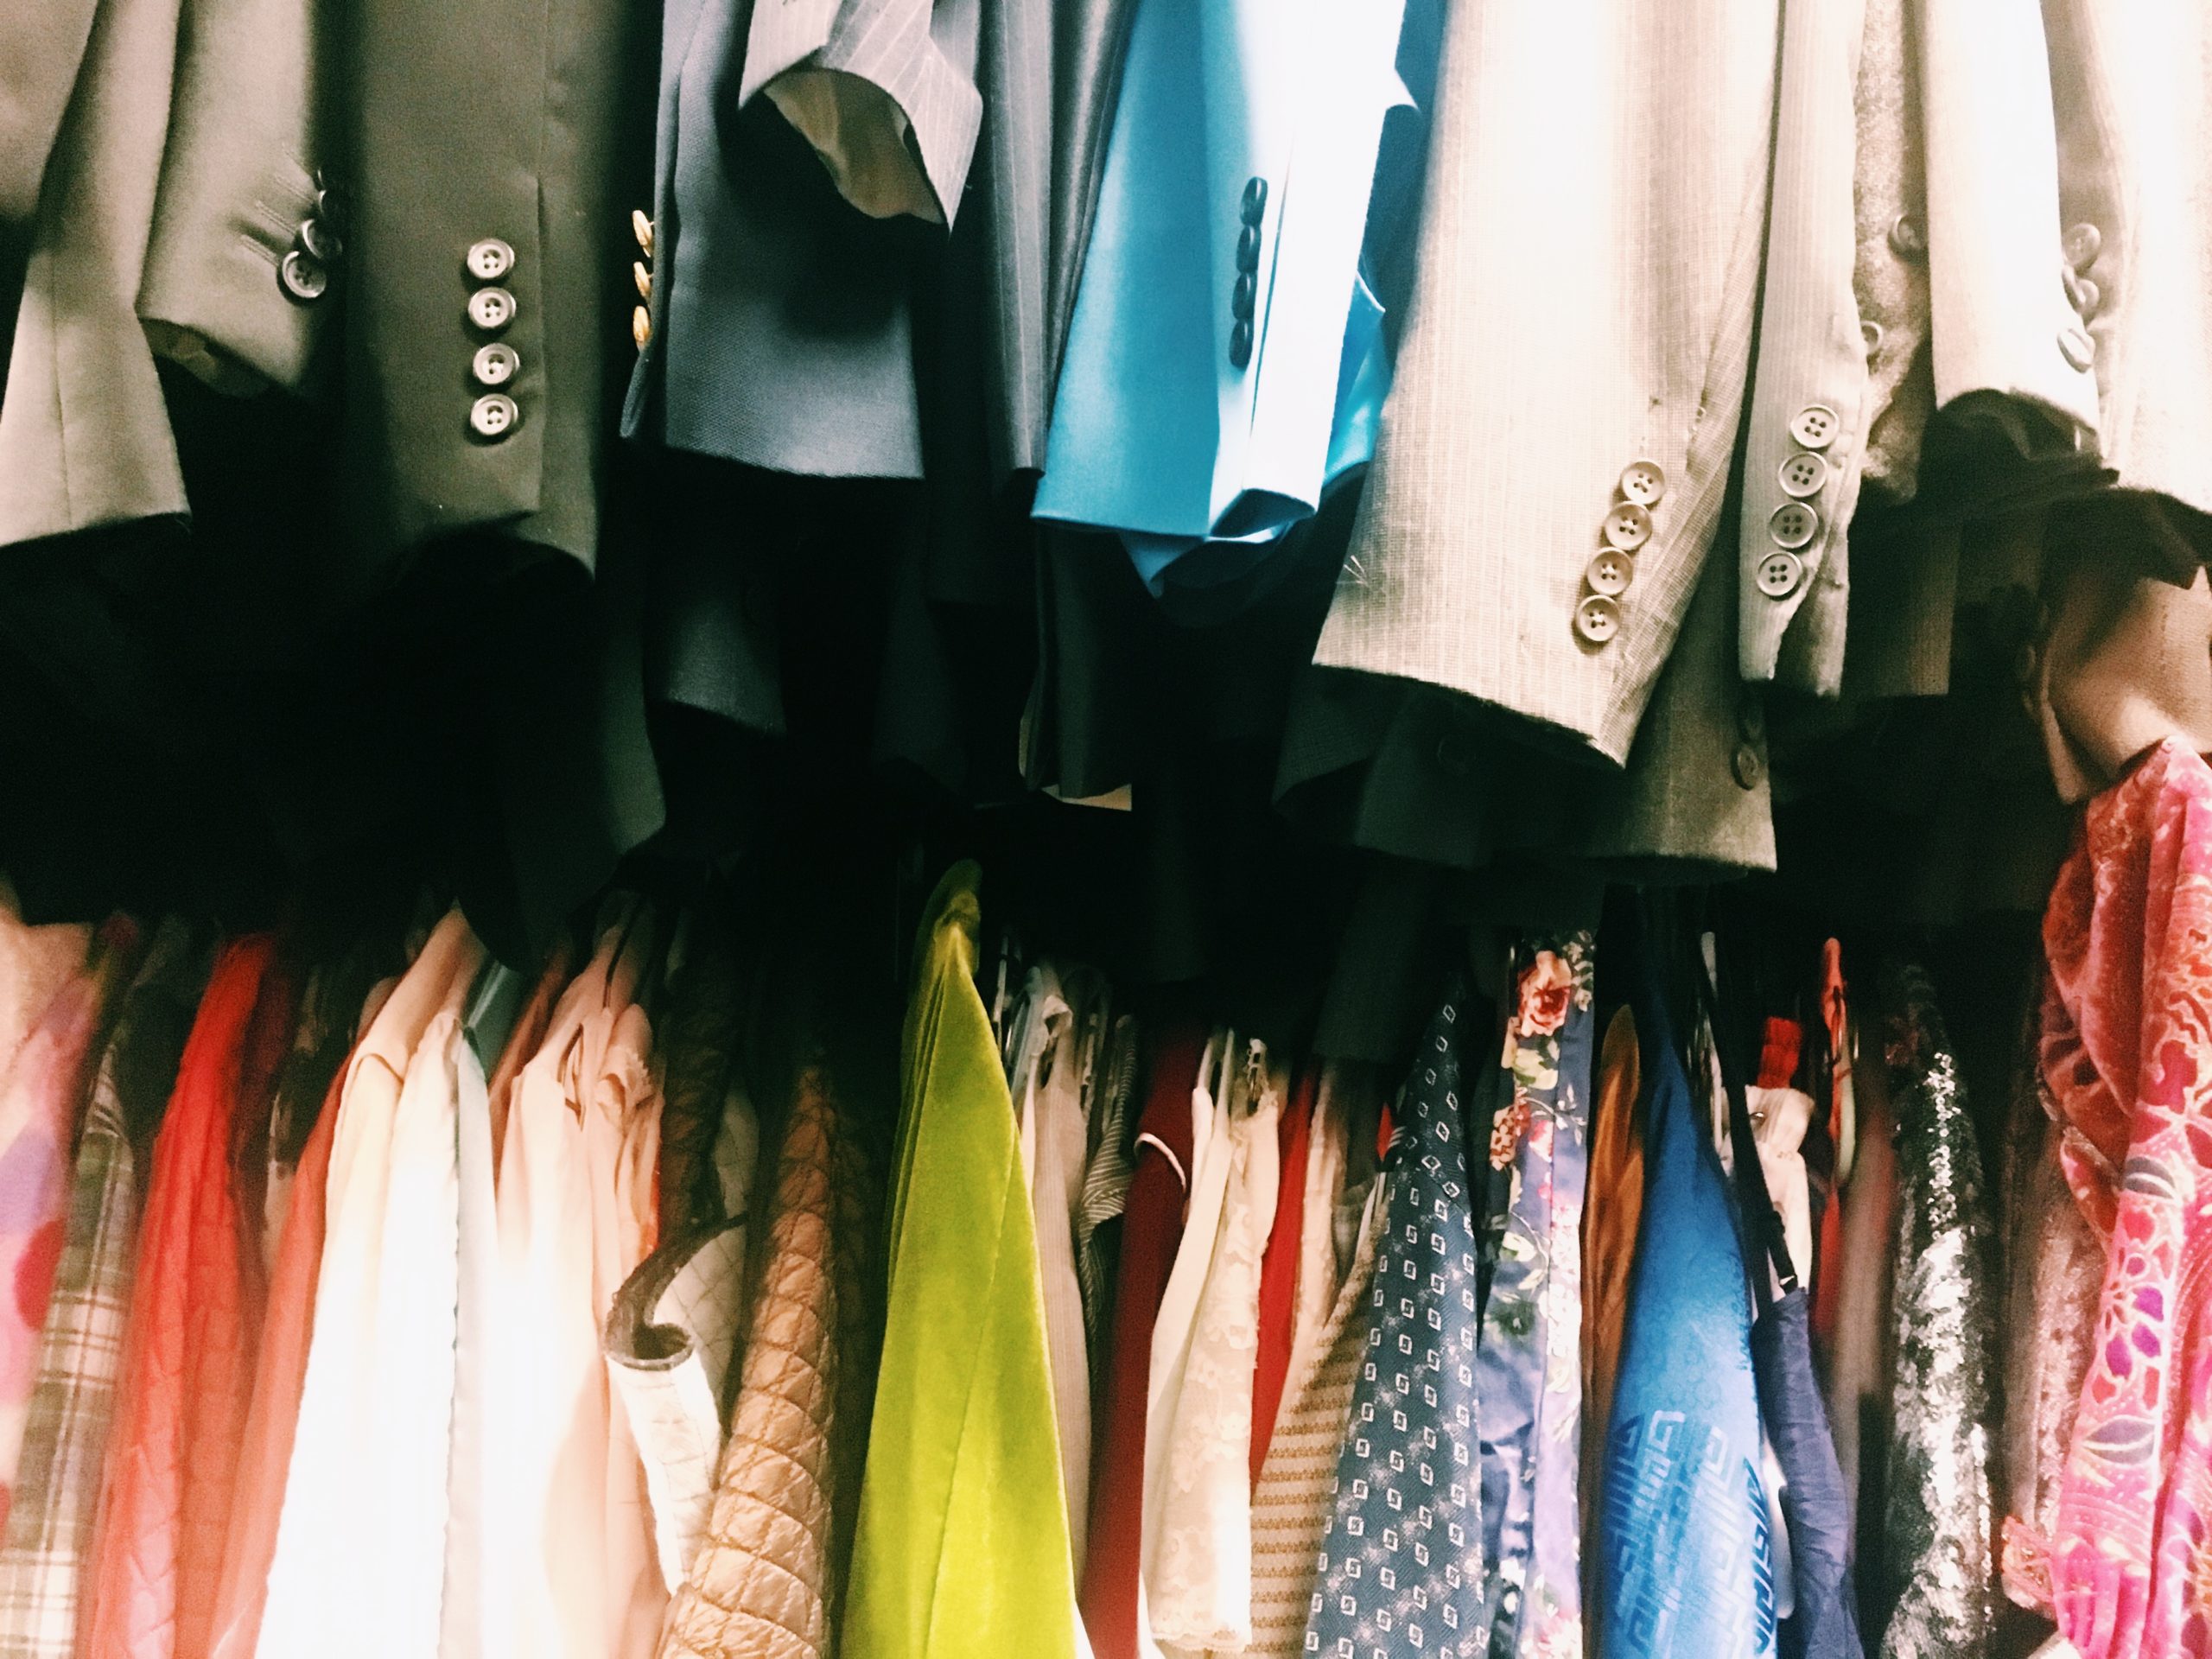 colorful clothing hangs tightly packed on racks